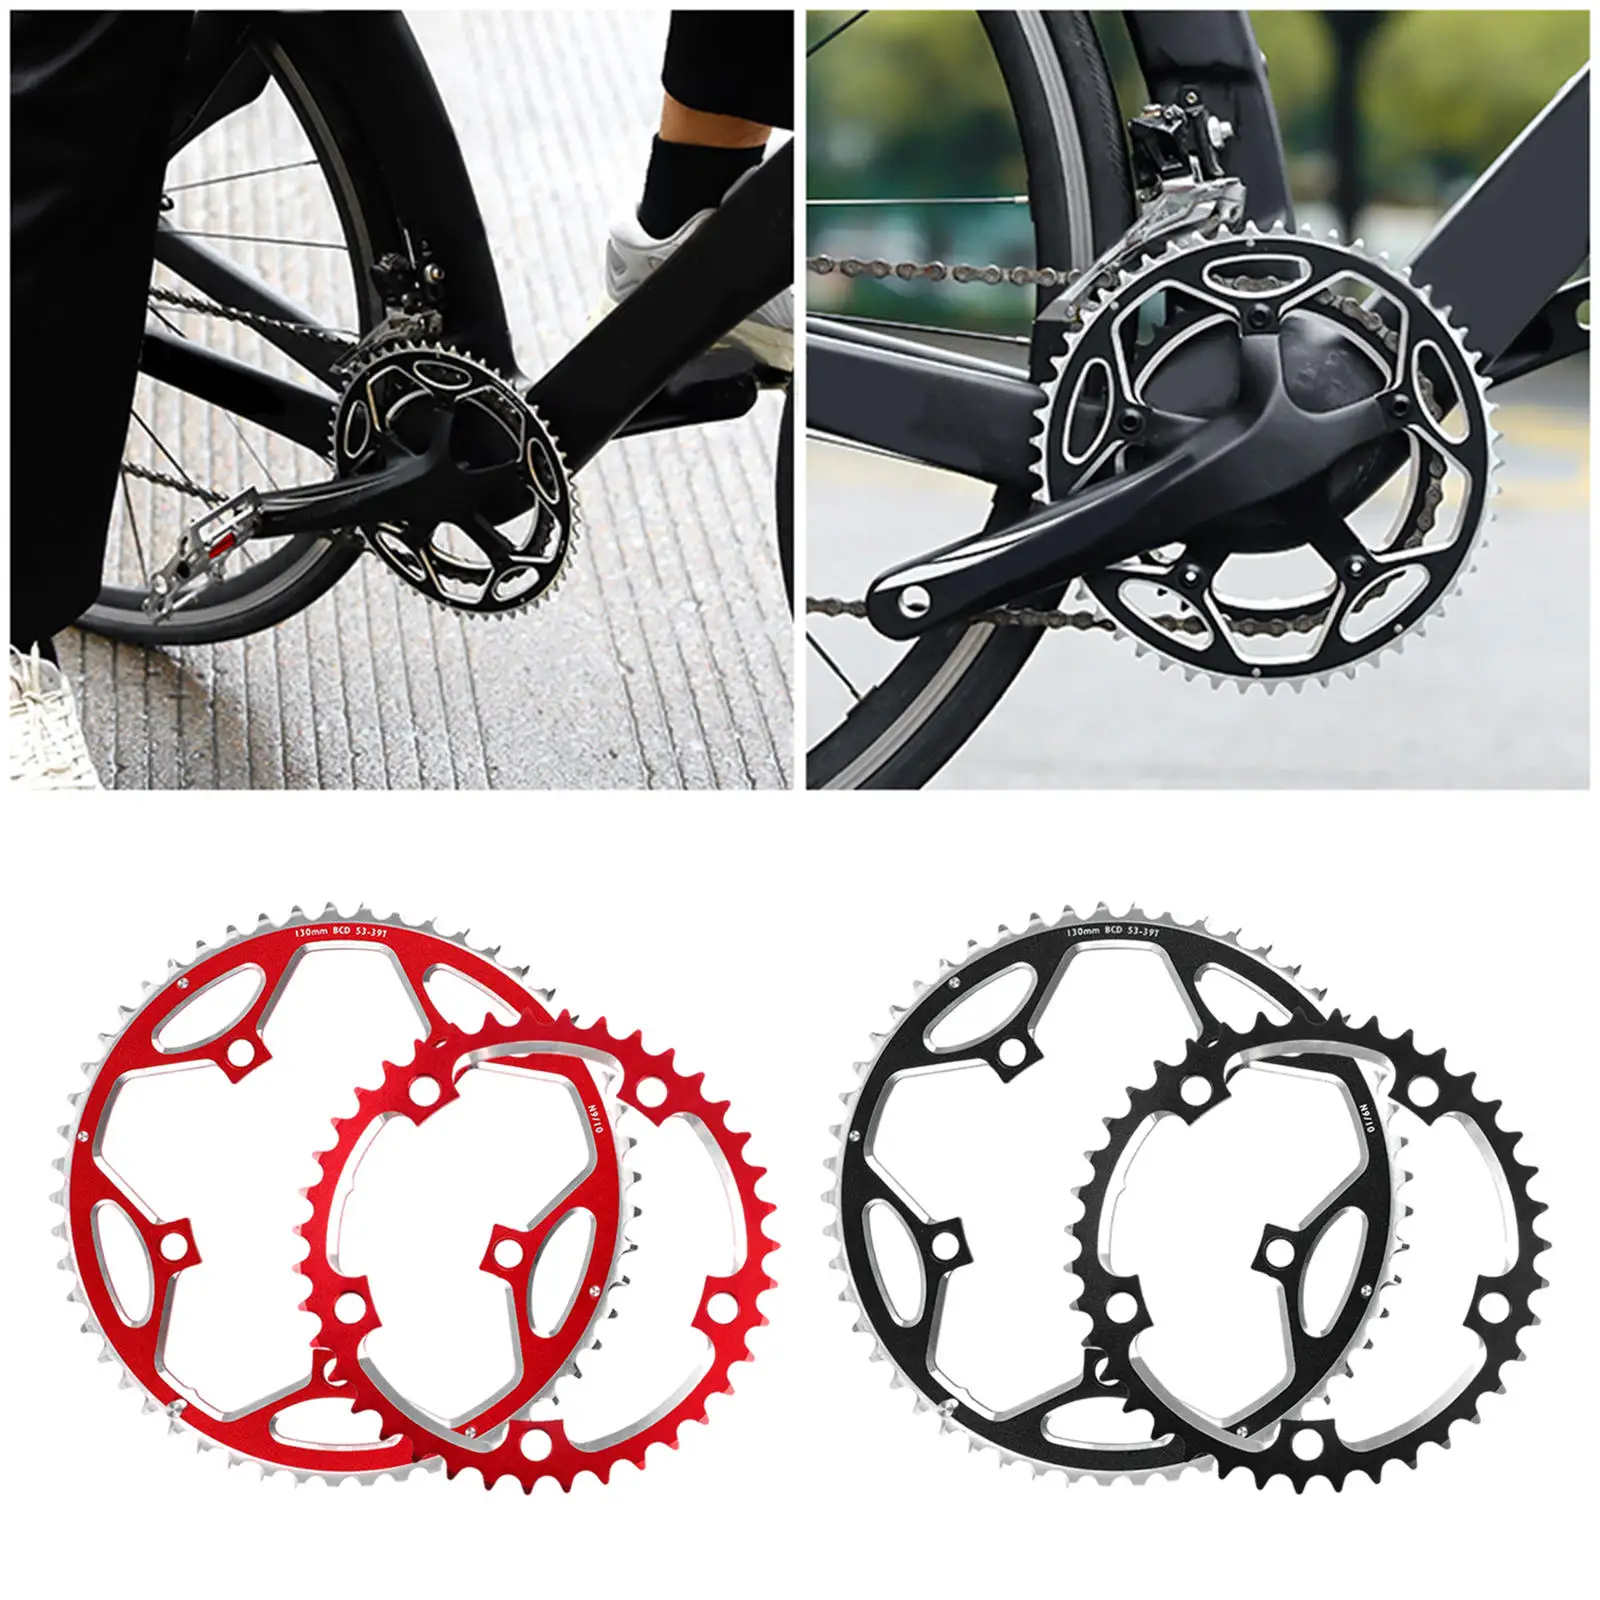 Road Bike Chainring Aluminum Alloy 130mm BCD Round Bicycle Chainring 39-53T for 8-11 Speed Parts Supplies Repair